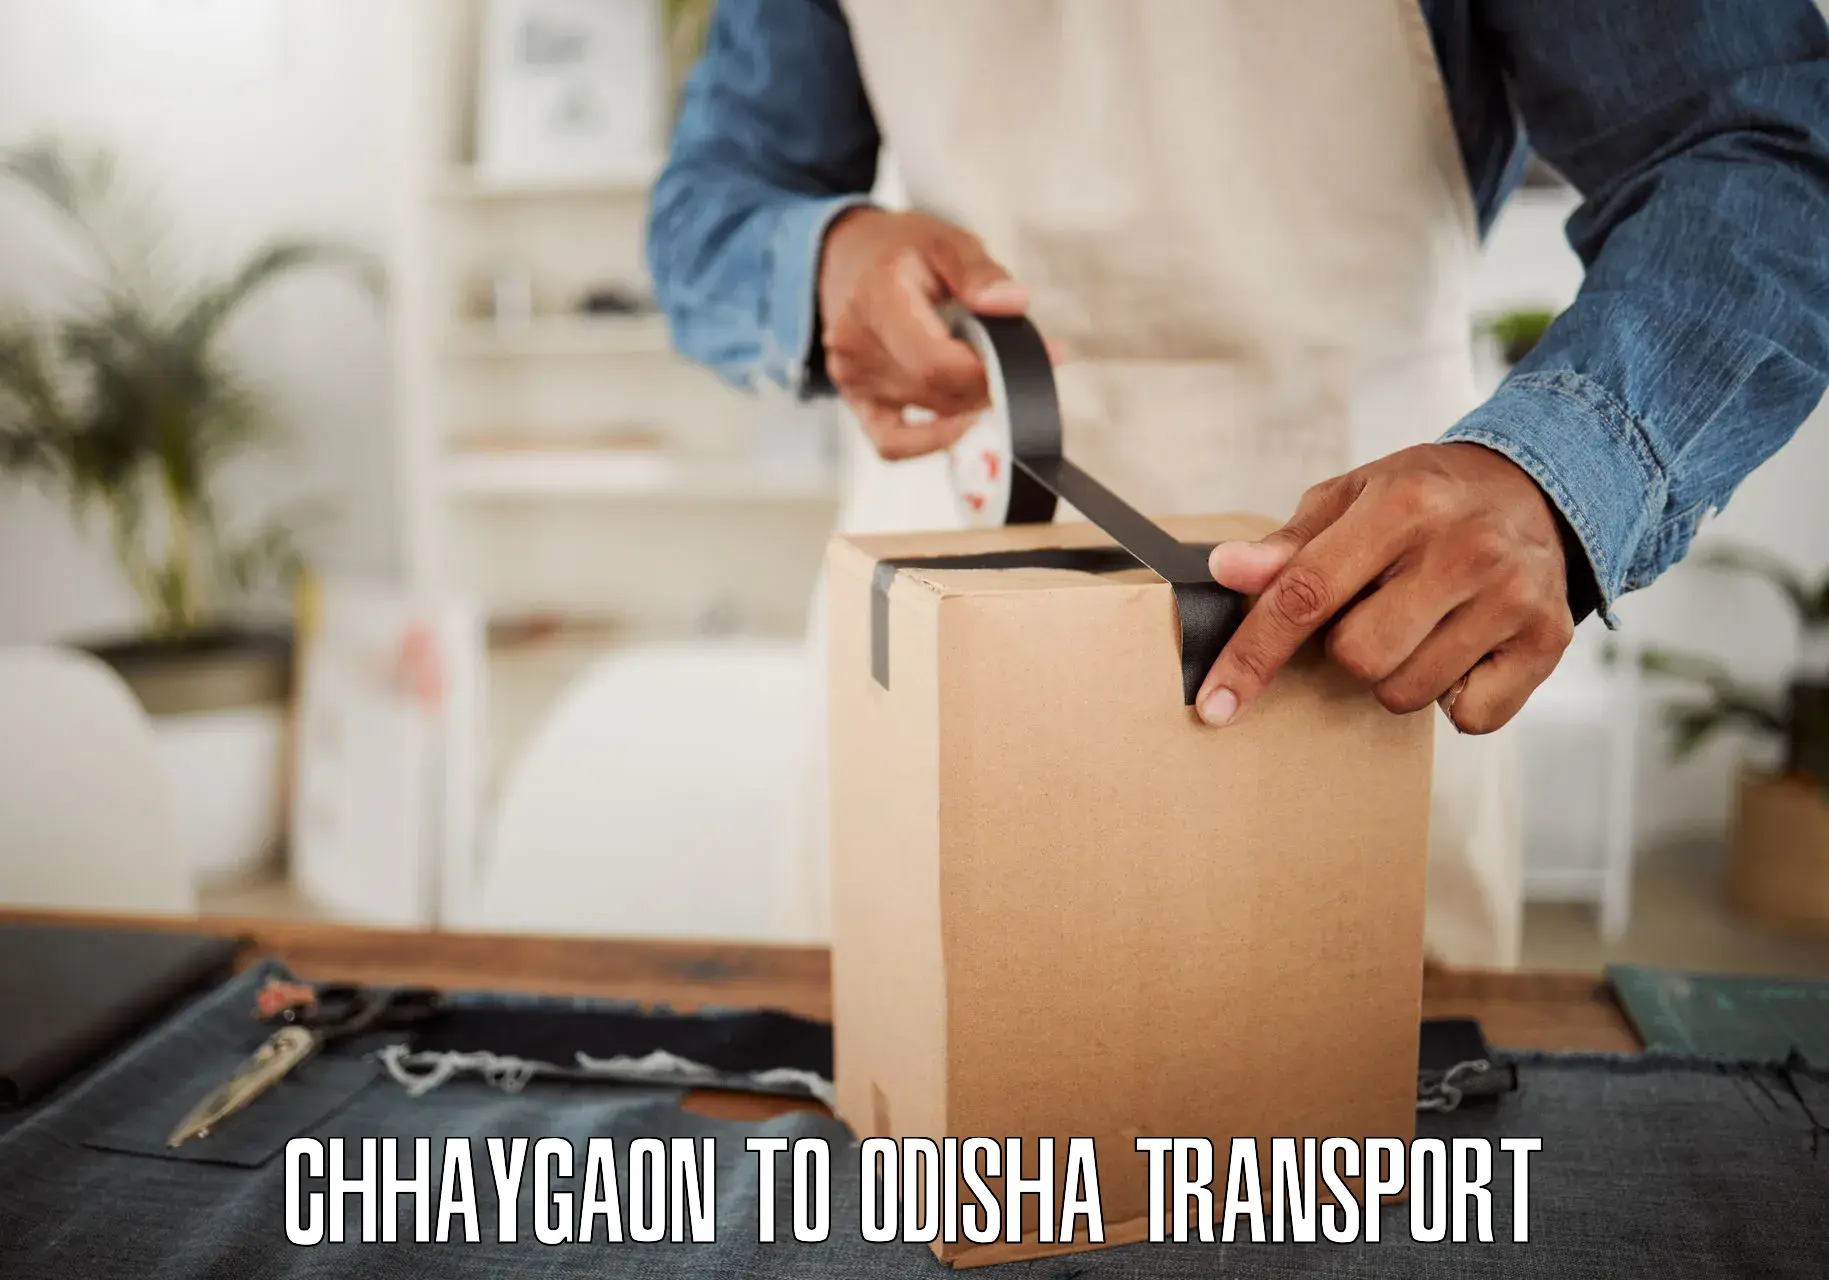 Two wheeler transport services in Chhaygaon to Rajgangpur